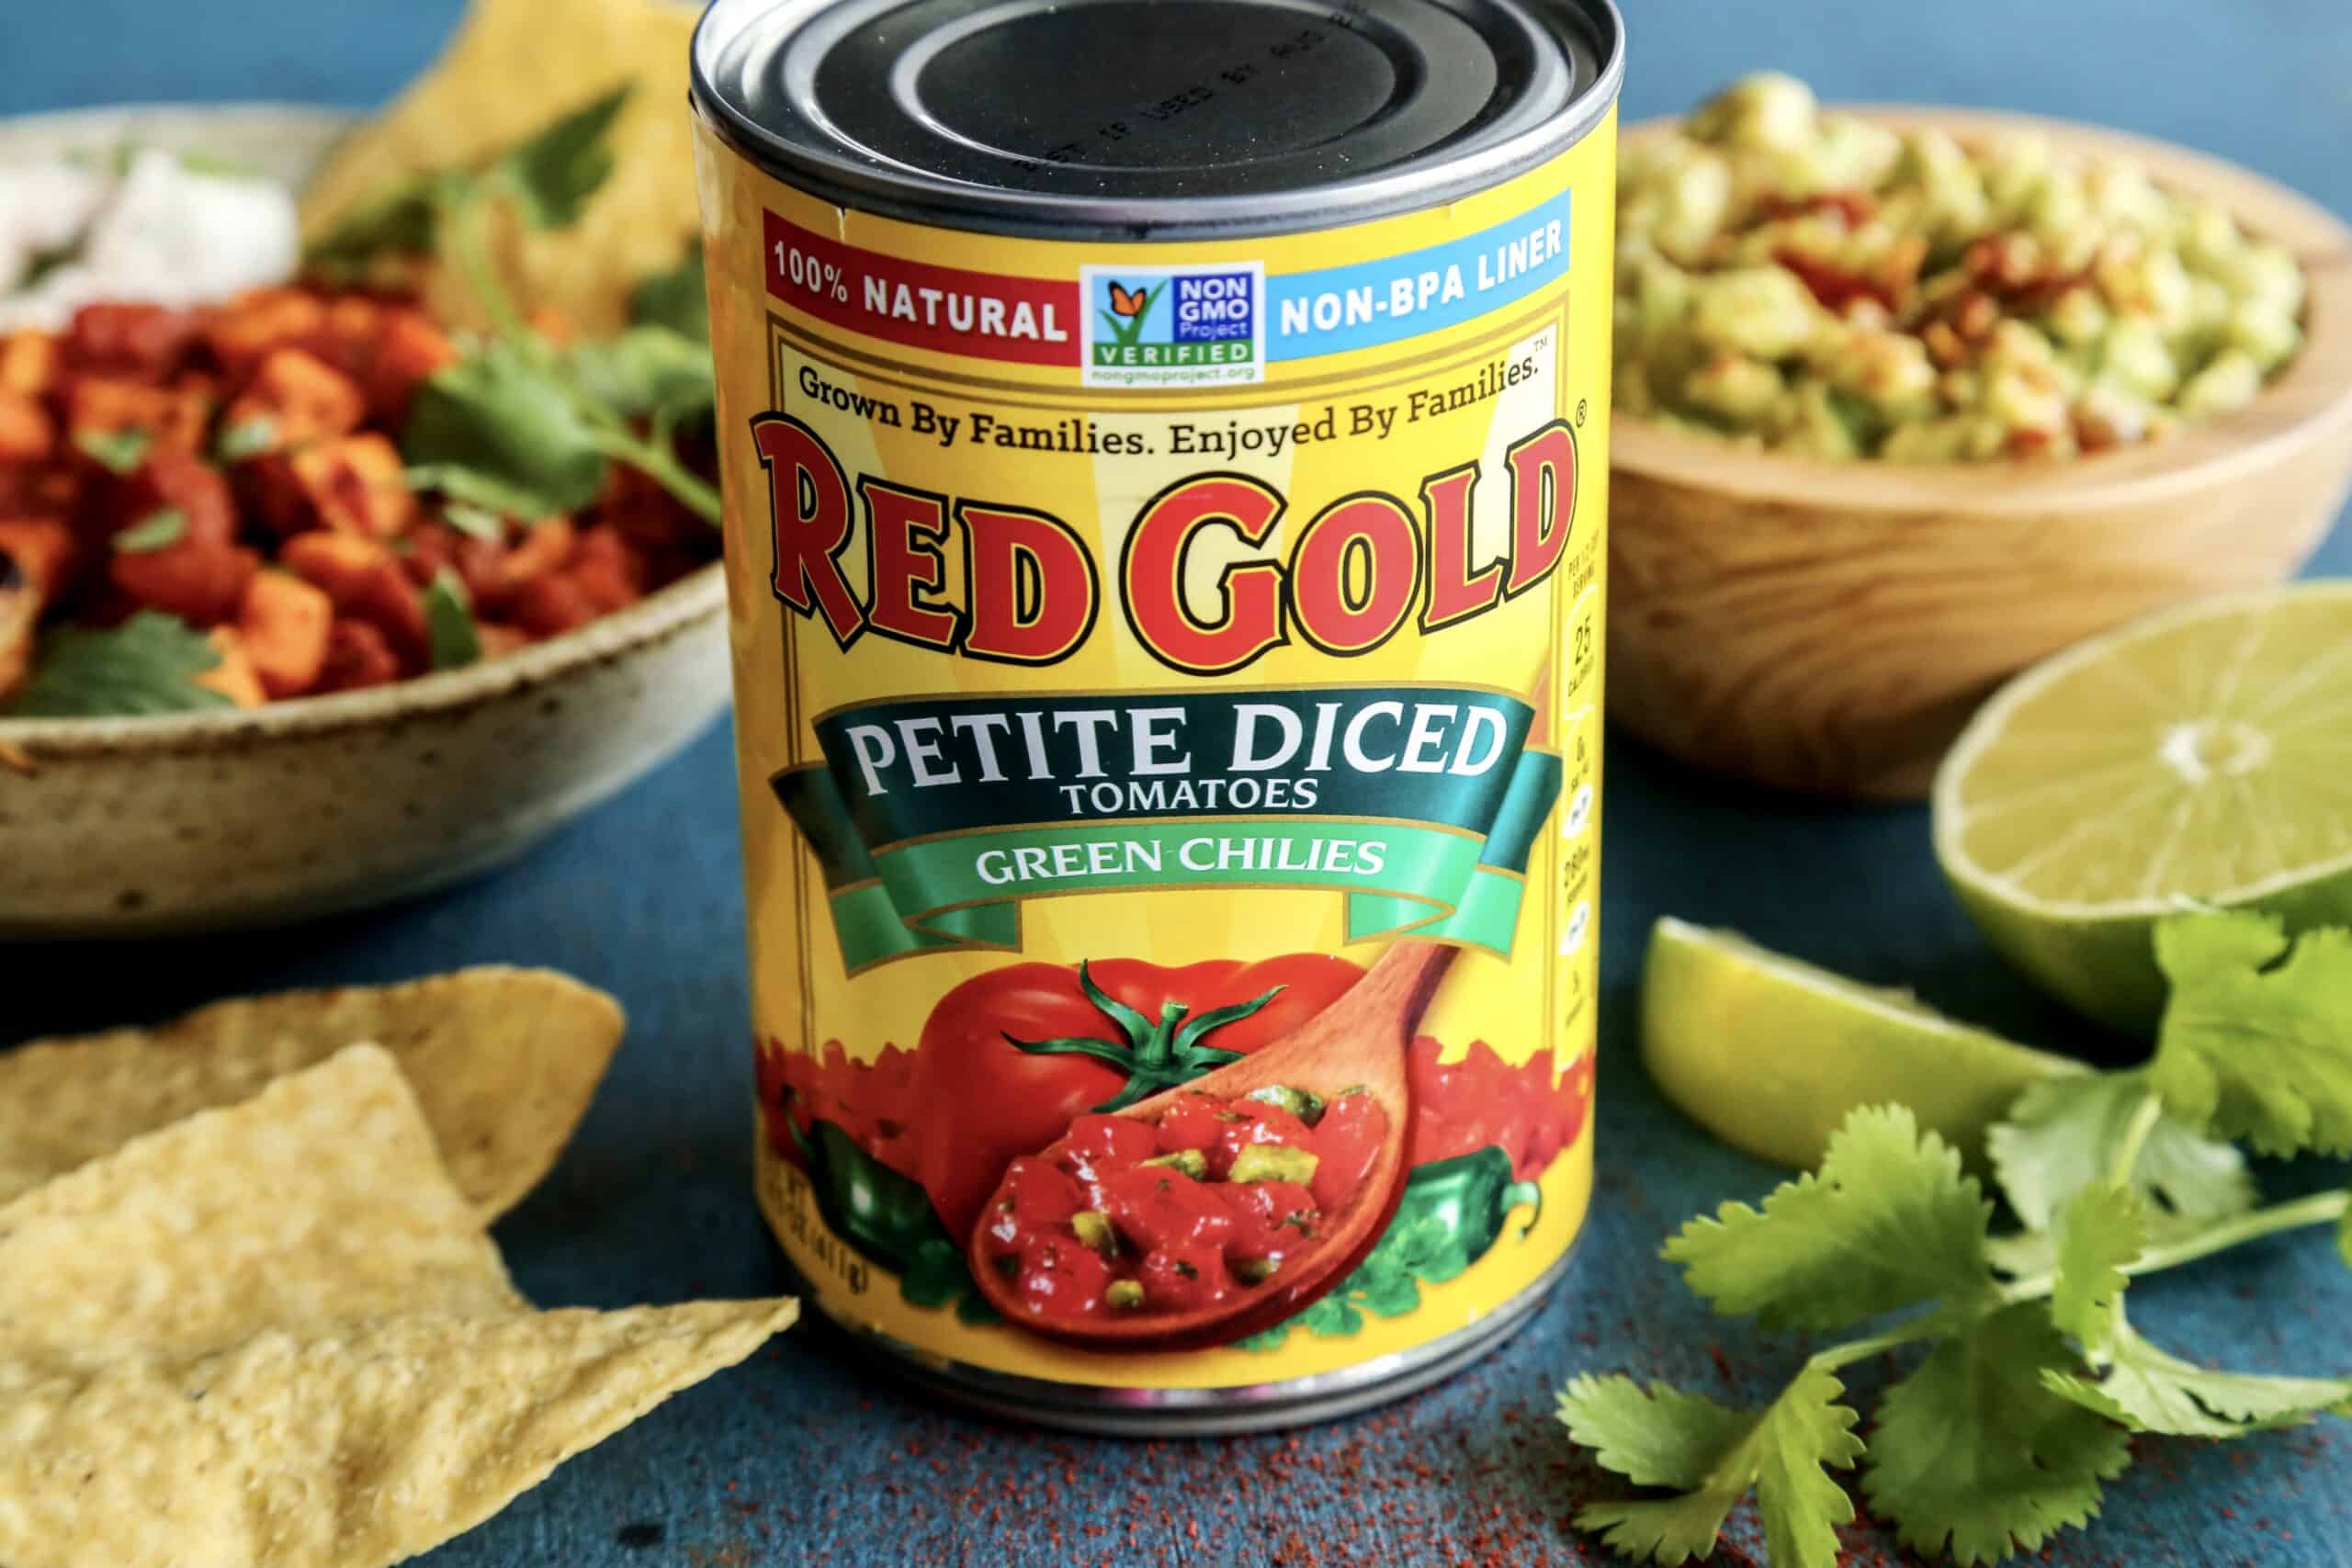 a can of Red Gold Petite Diced Tomatoes with Green Chilies, plus a bowl of guacamole and a grilled shrimp bowl in the background